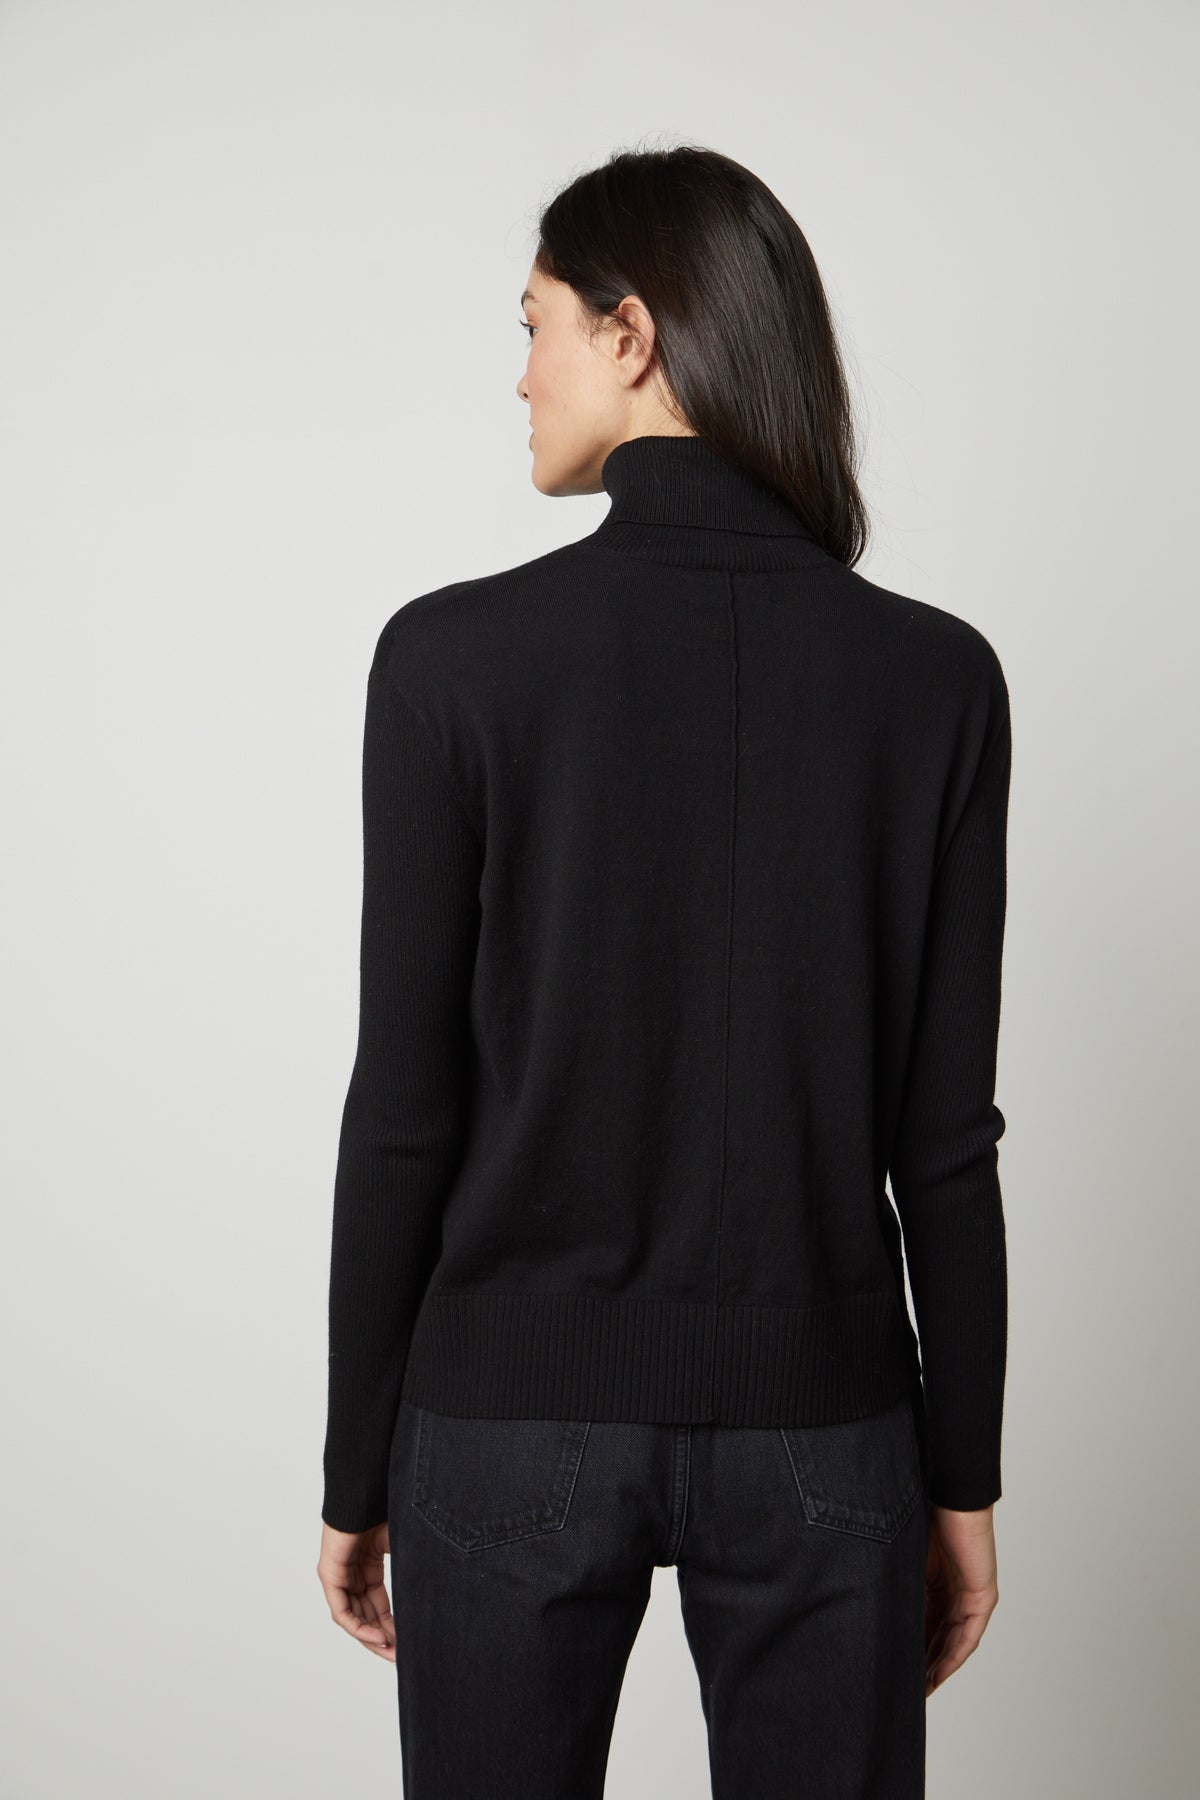 The back view of a woman wearing a fitted black SALLY MOCK NECK SWEATER from Velvet by Graham & Spencer.-26910281466049